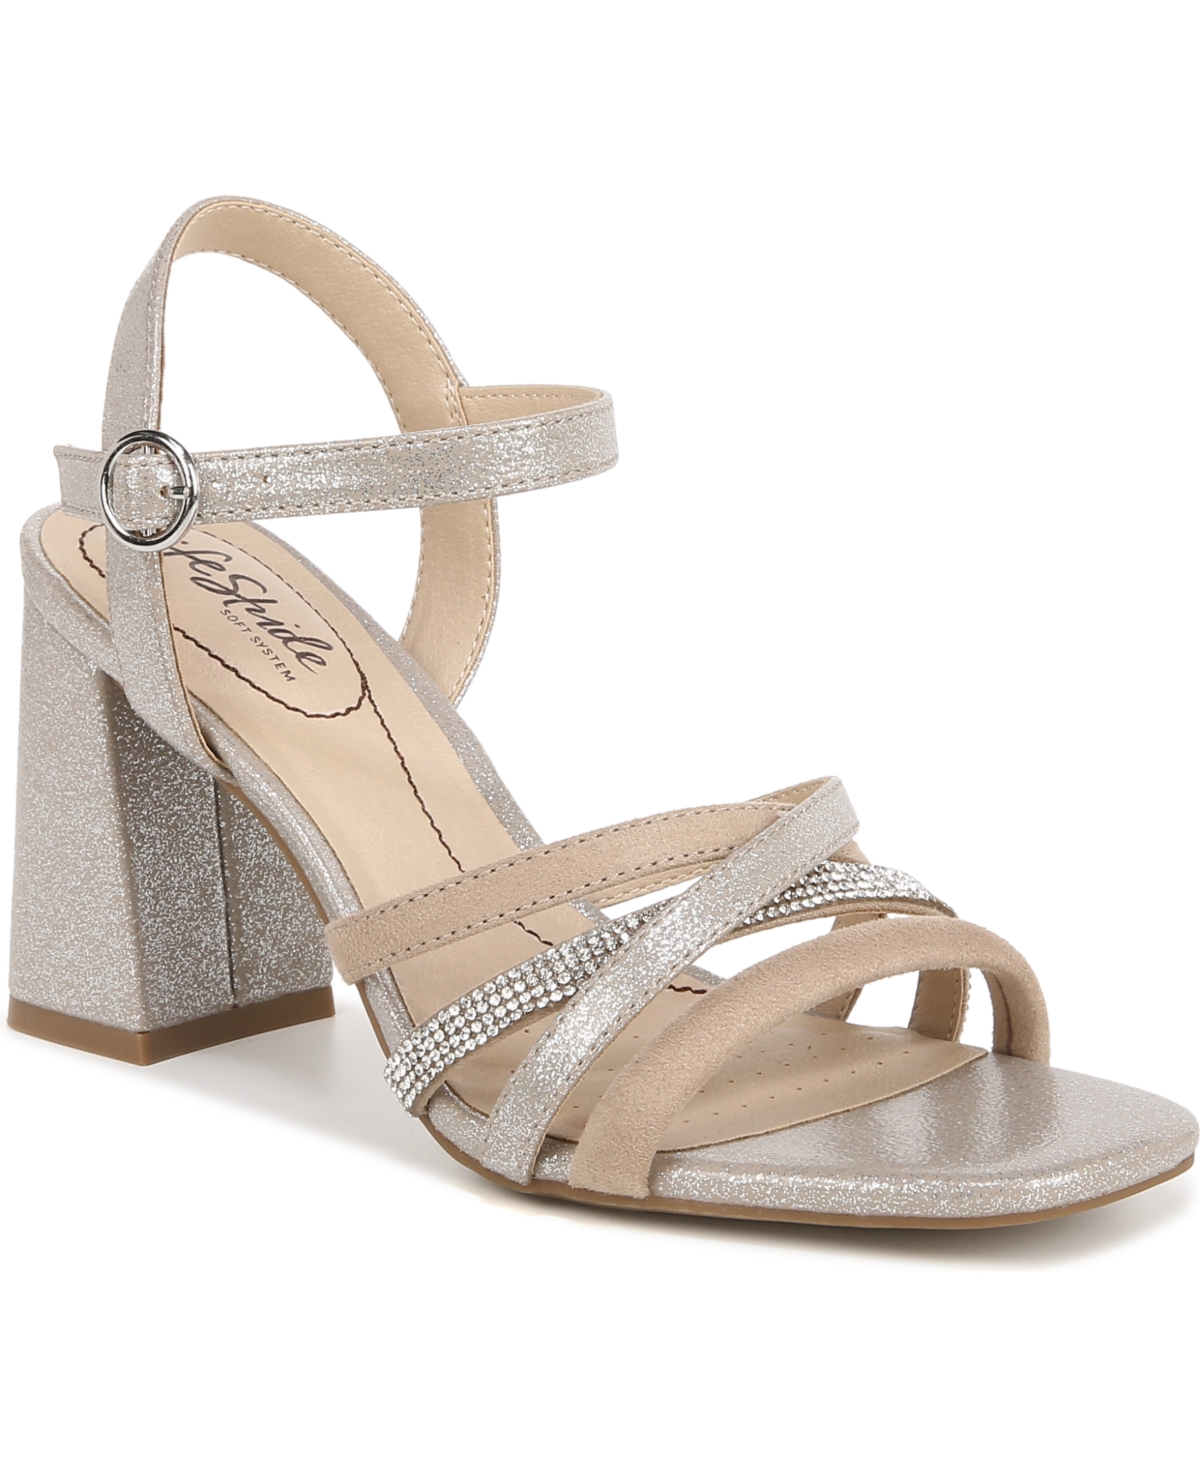 Lifestride Belle Dress Sandals In Champagne Fabric